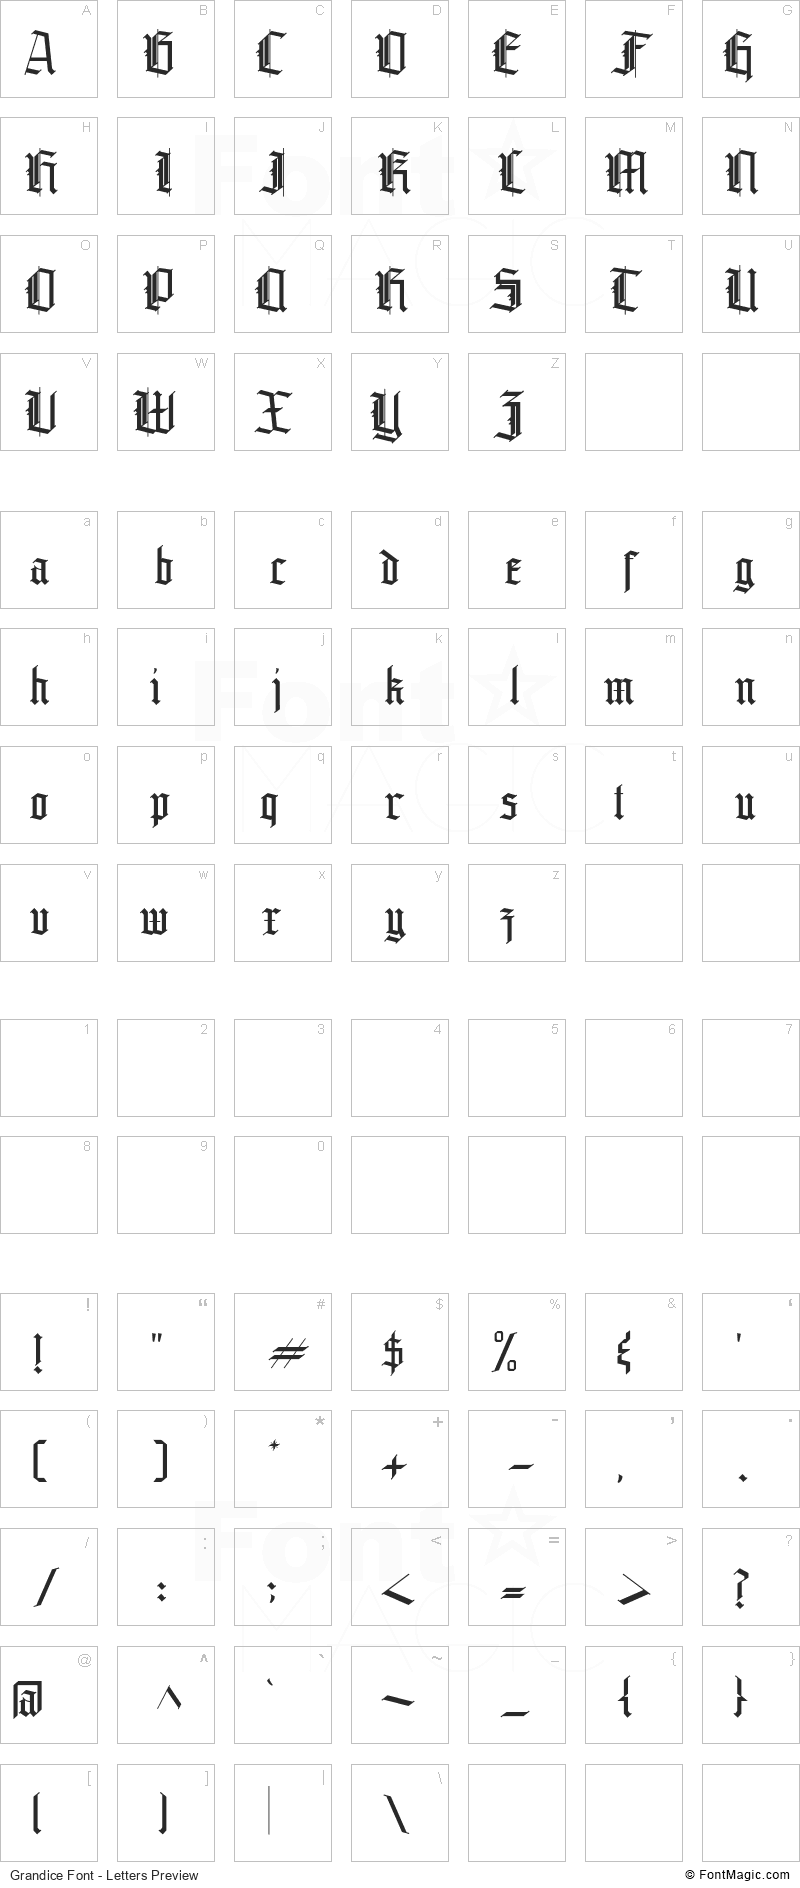 Grandice Font - All Latters Preview Chart